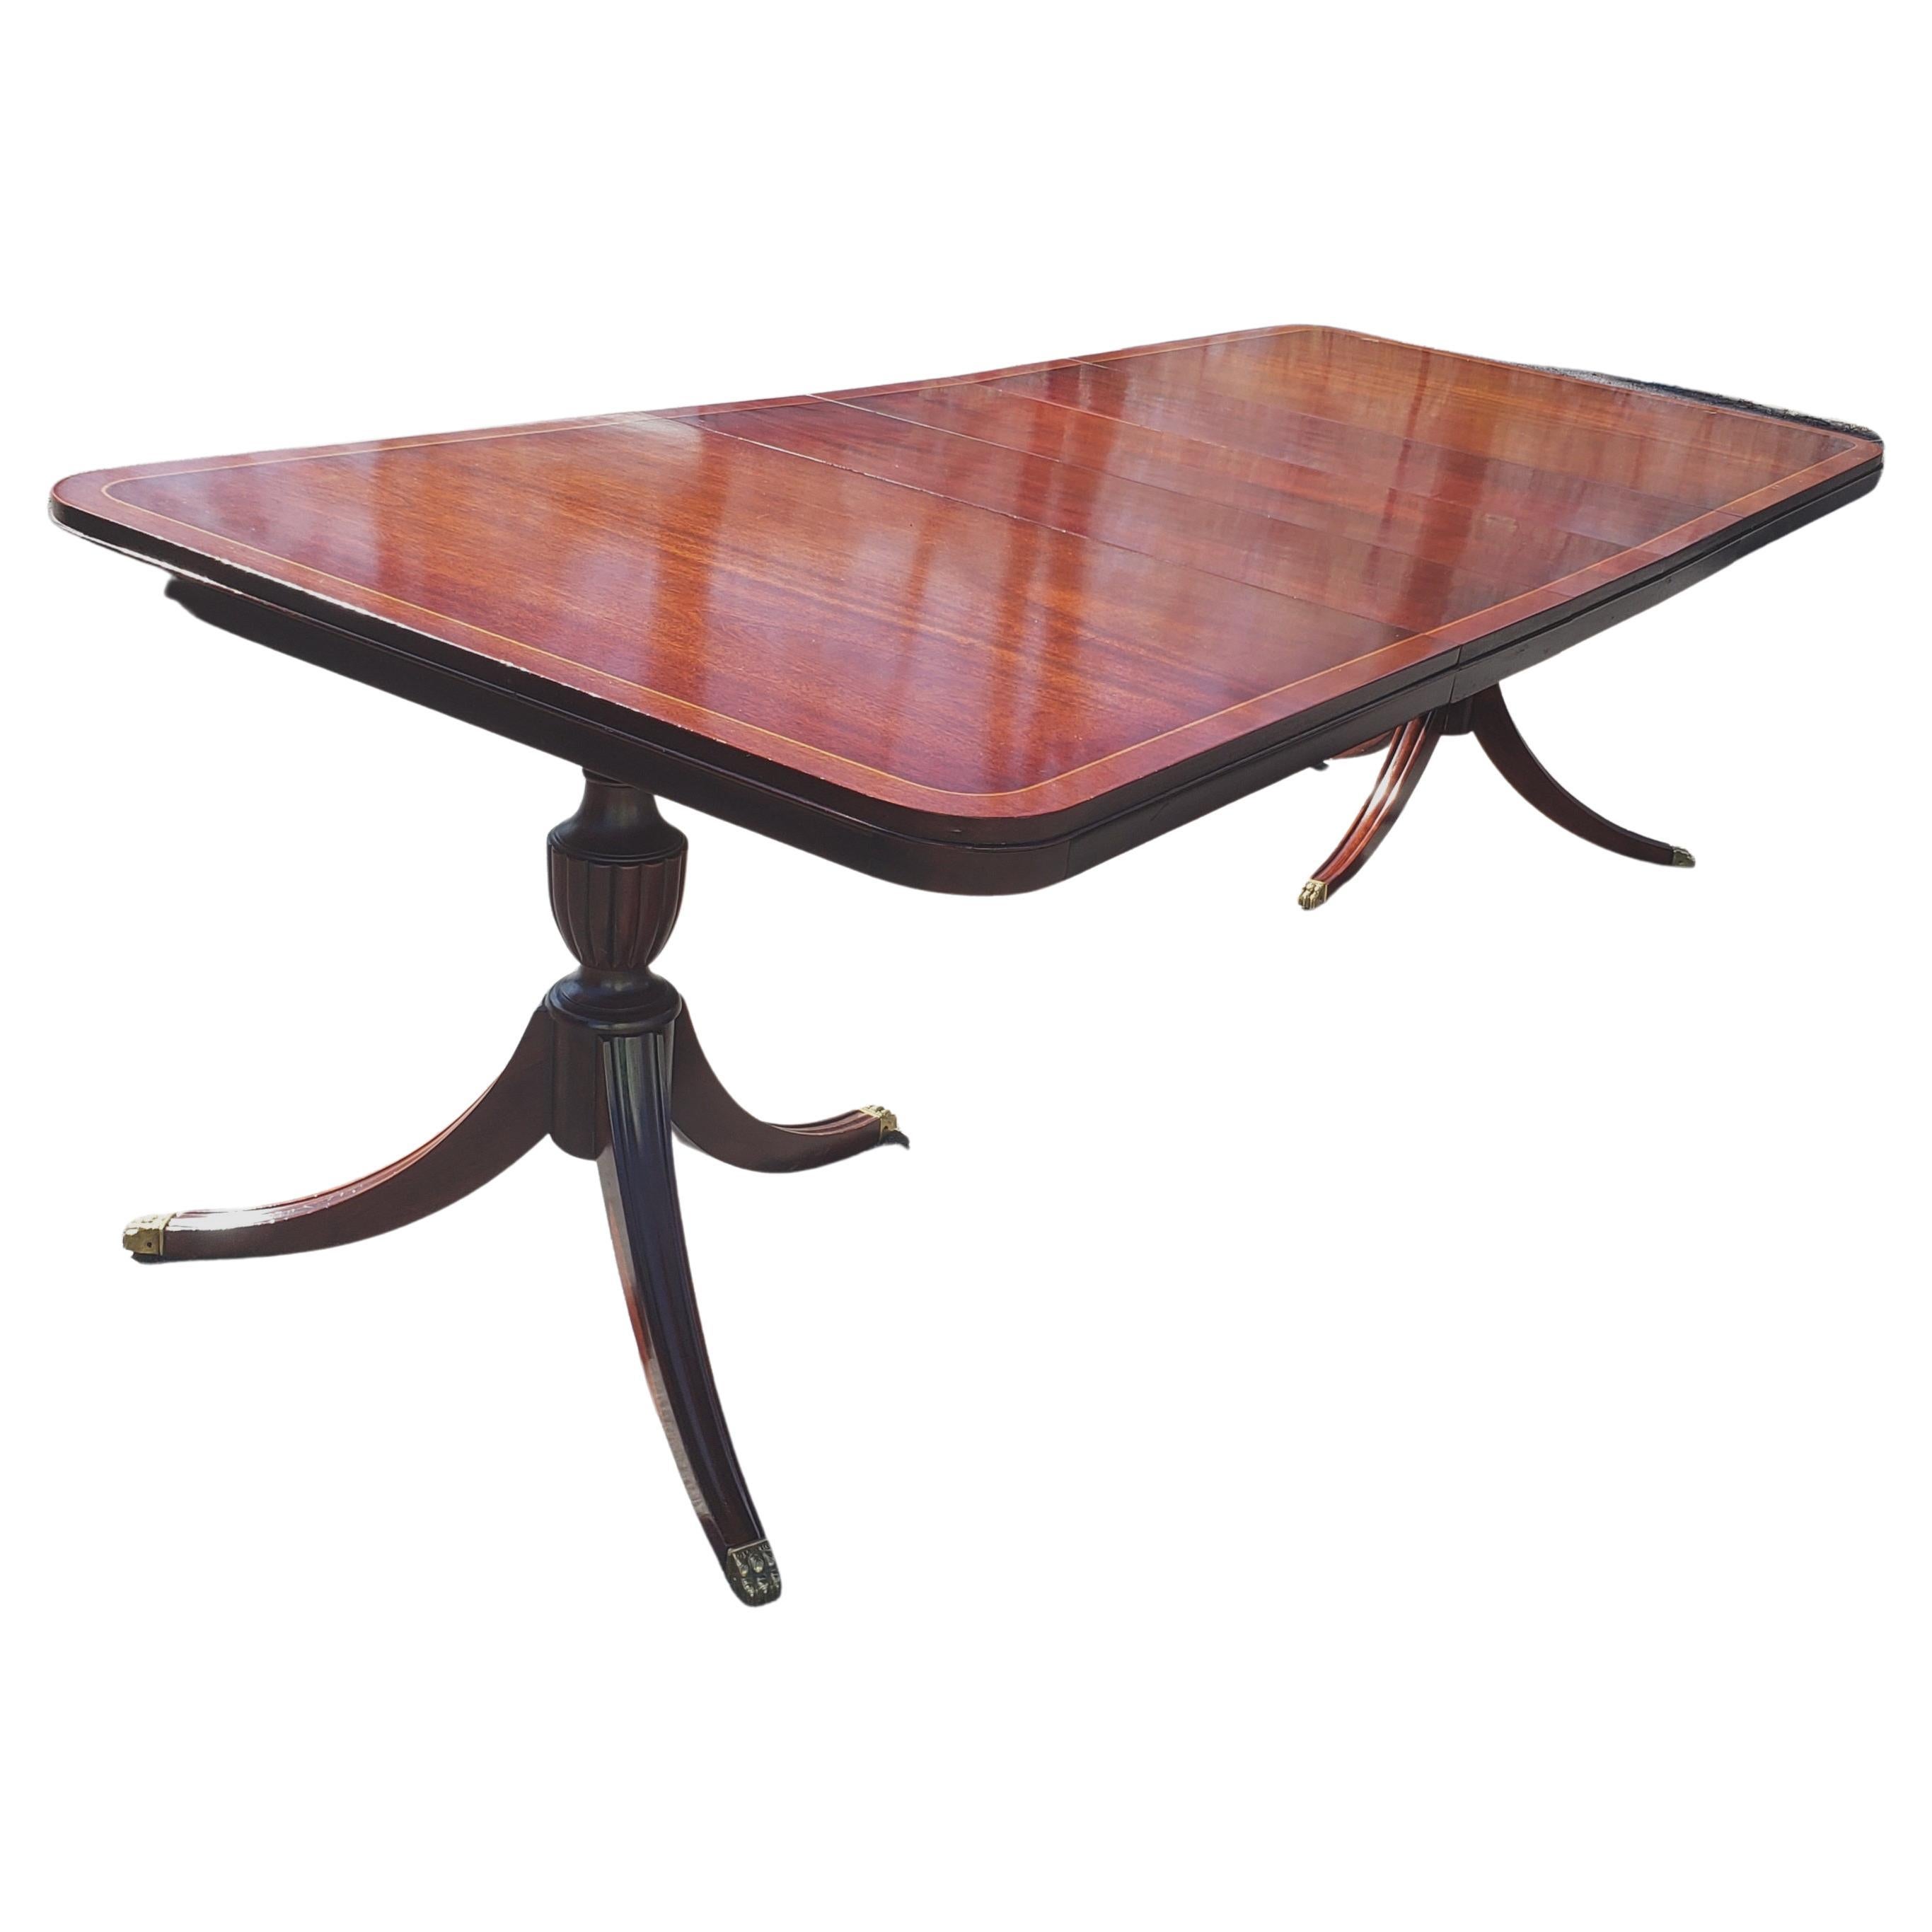 20th Century Regency Crossbanded Mahogany Satinwood Double Pedestal Extension Dining Table For Sale